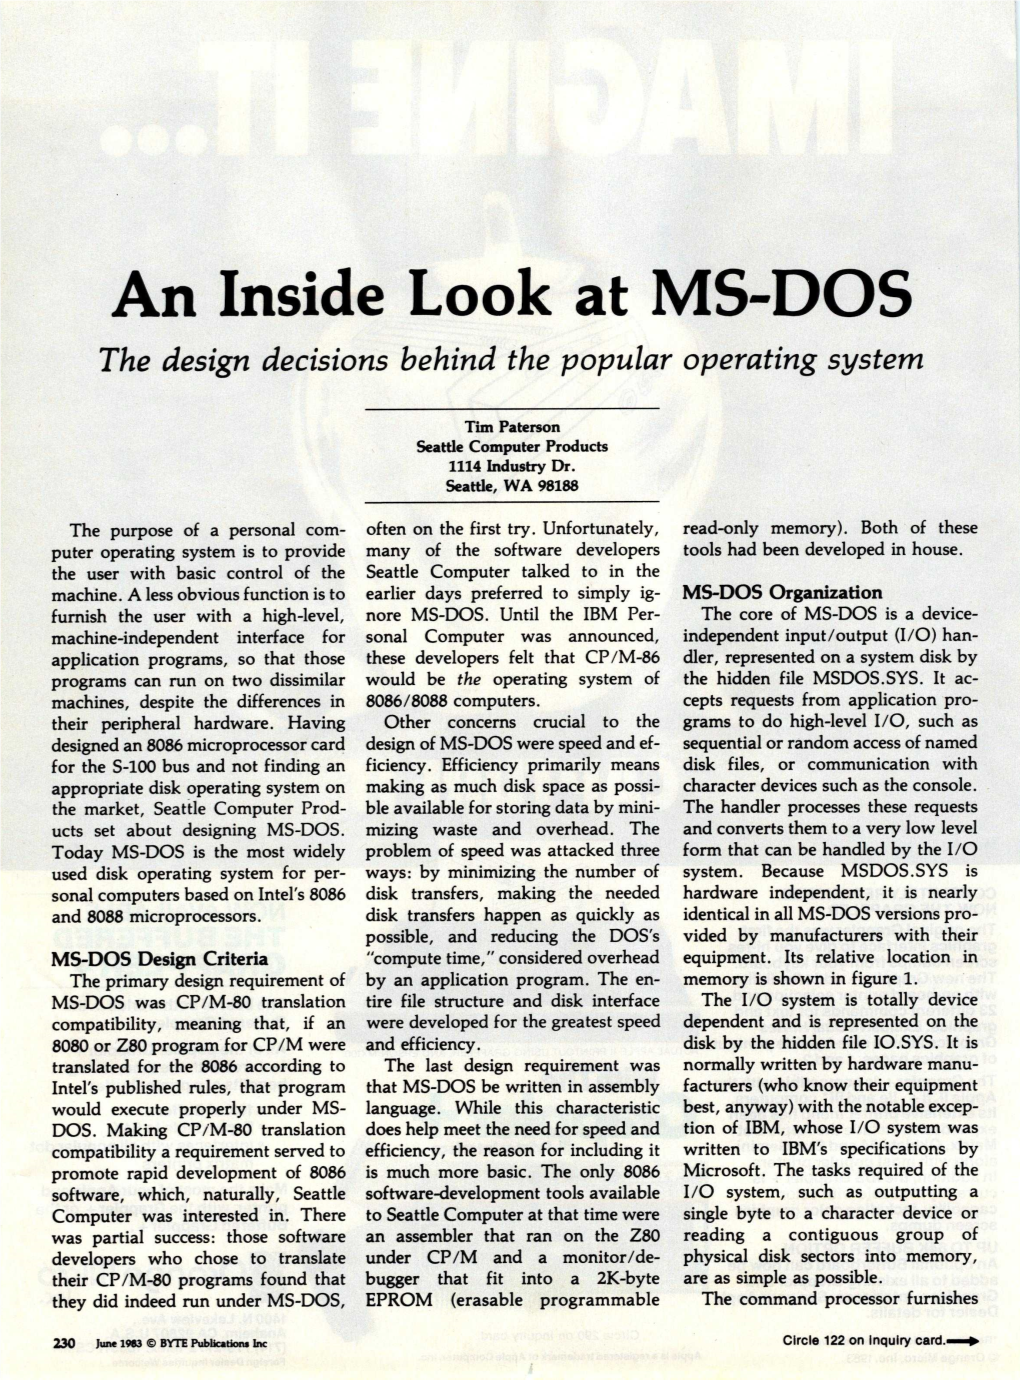 An Inside Look at MS-DOS, June 1983, BYTE Magazine